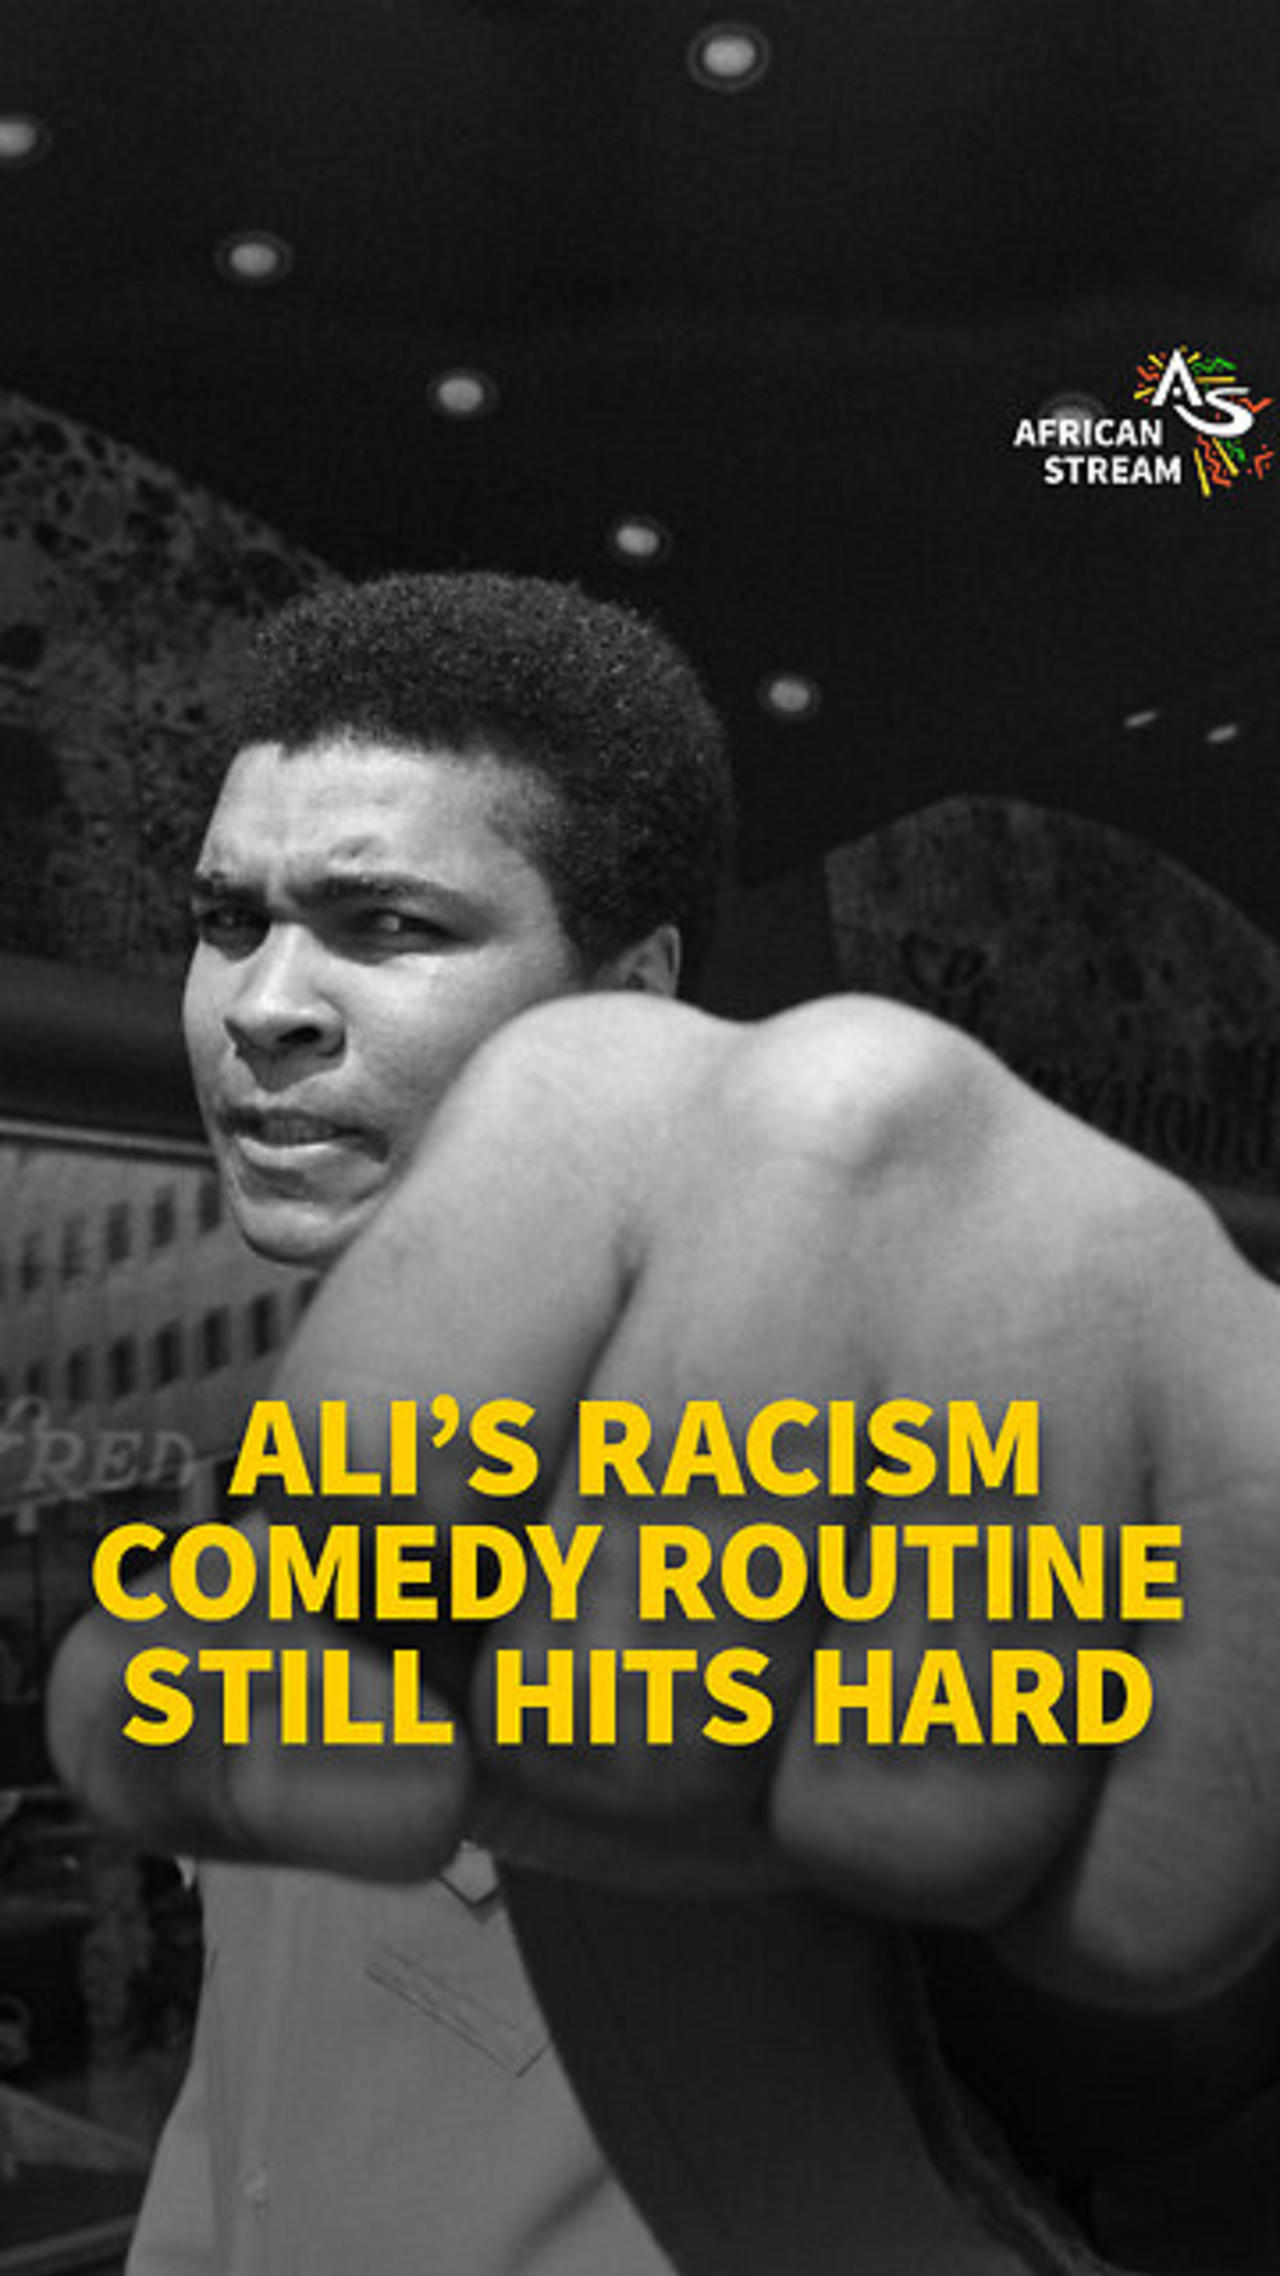 ALI’S RACISM COMEDY ROUTINE STILL HITS HARD